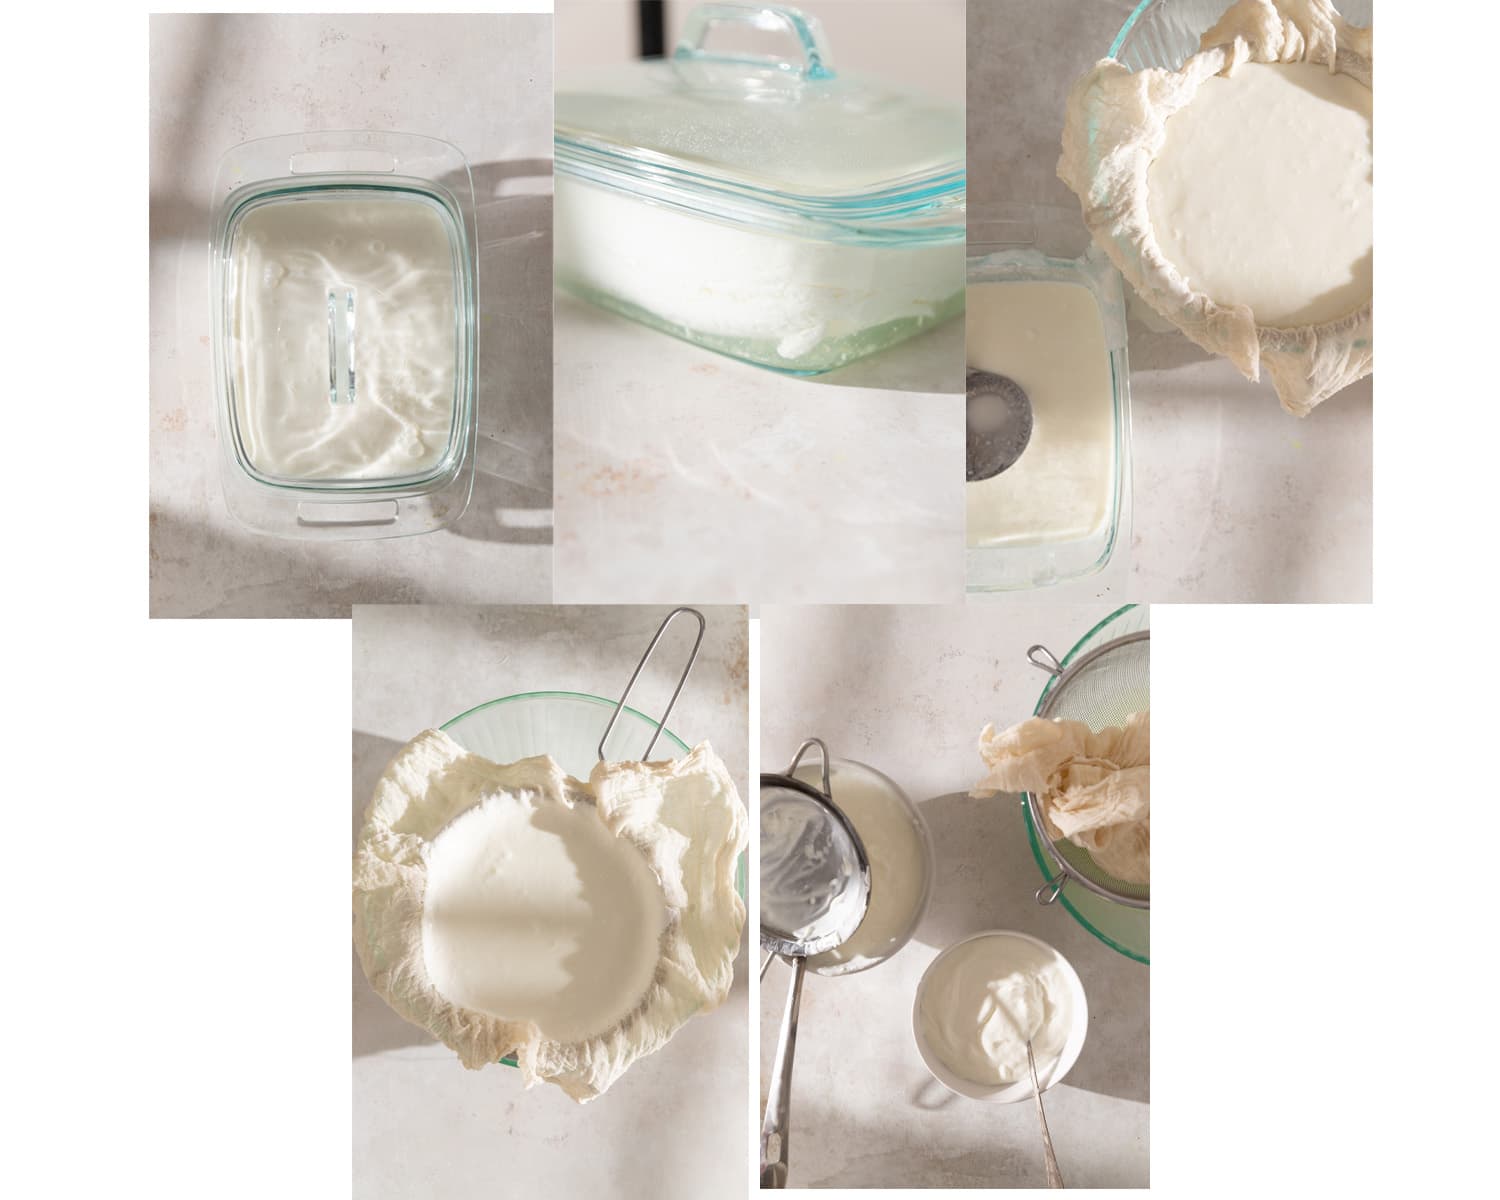 Process images showing how to make quark using the oven method.